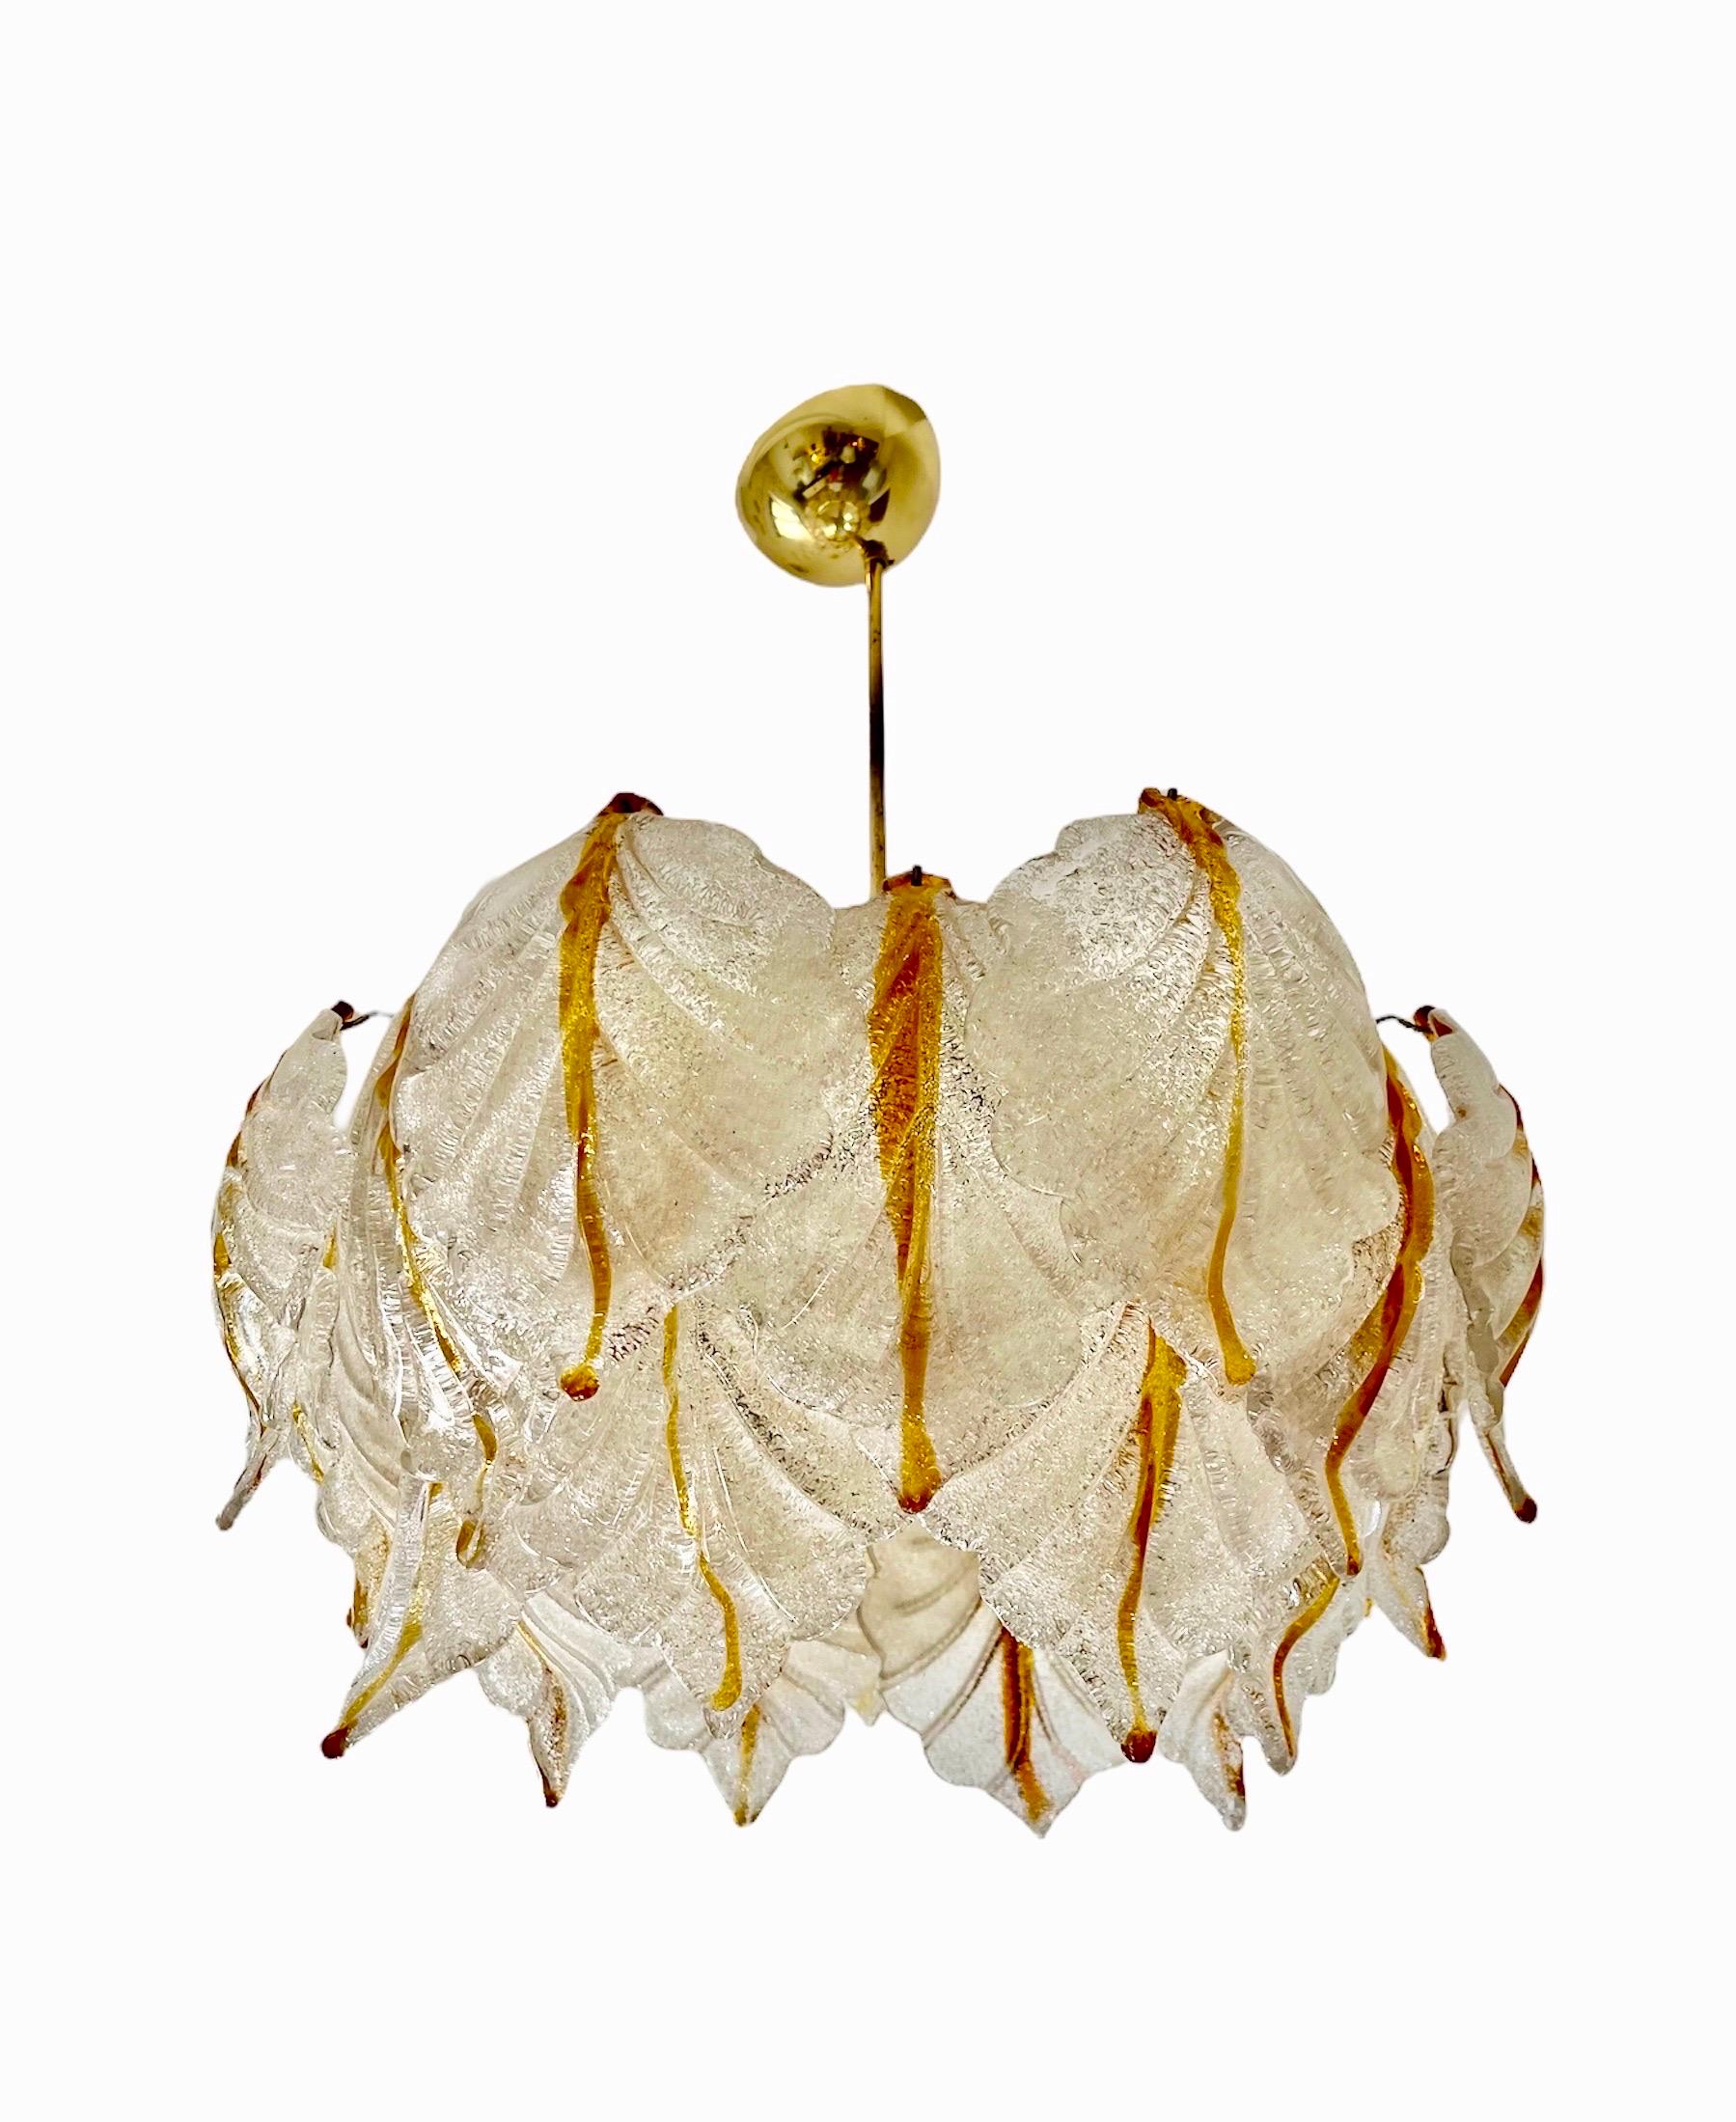 Exceptional Mazzega chandelier with large leaves glass bicolore Murano with gilt gold structure. The Design and the quality of the glass make this piece the best of the italian Design.
This unique Mazzegai chandelier in ice frost bicolore glass